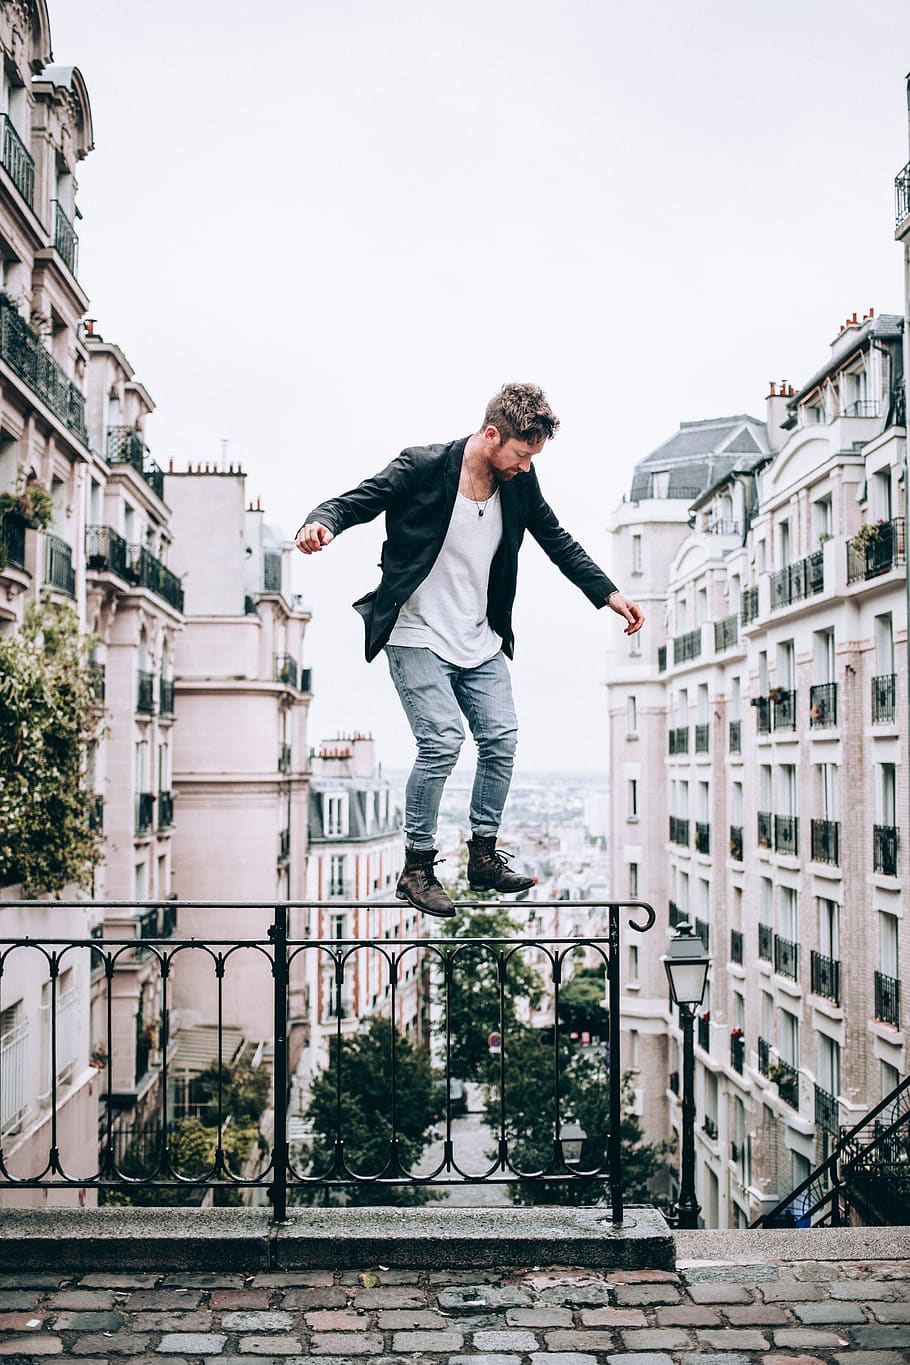 man, fashion, balancing, city, buildings, standing, person, architecture, outdoors, risk